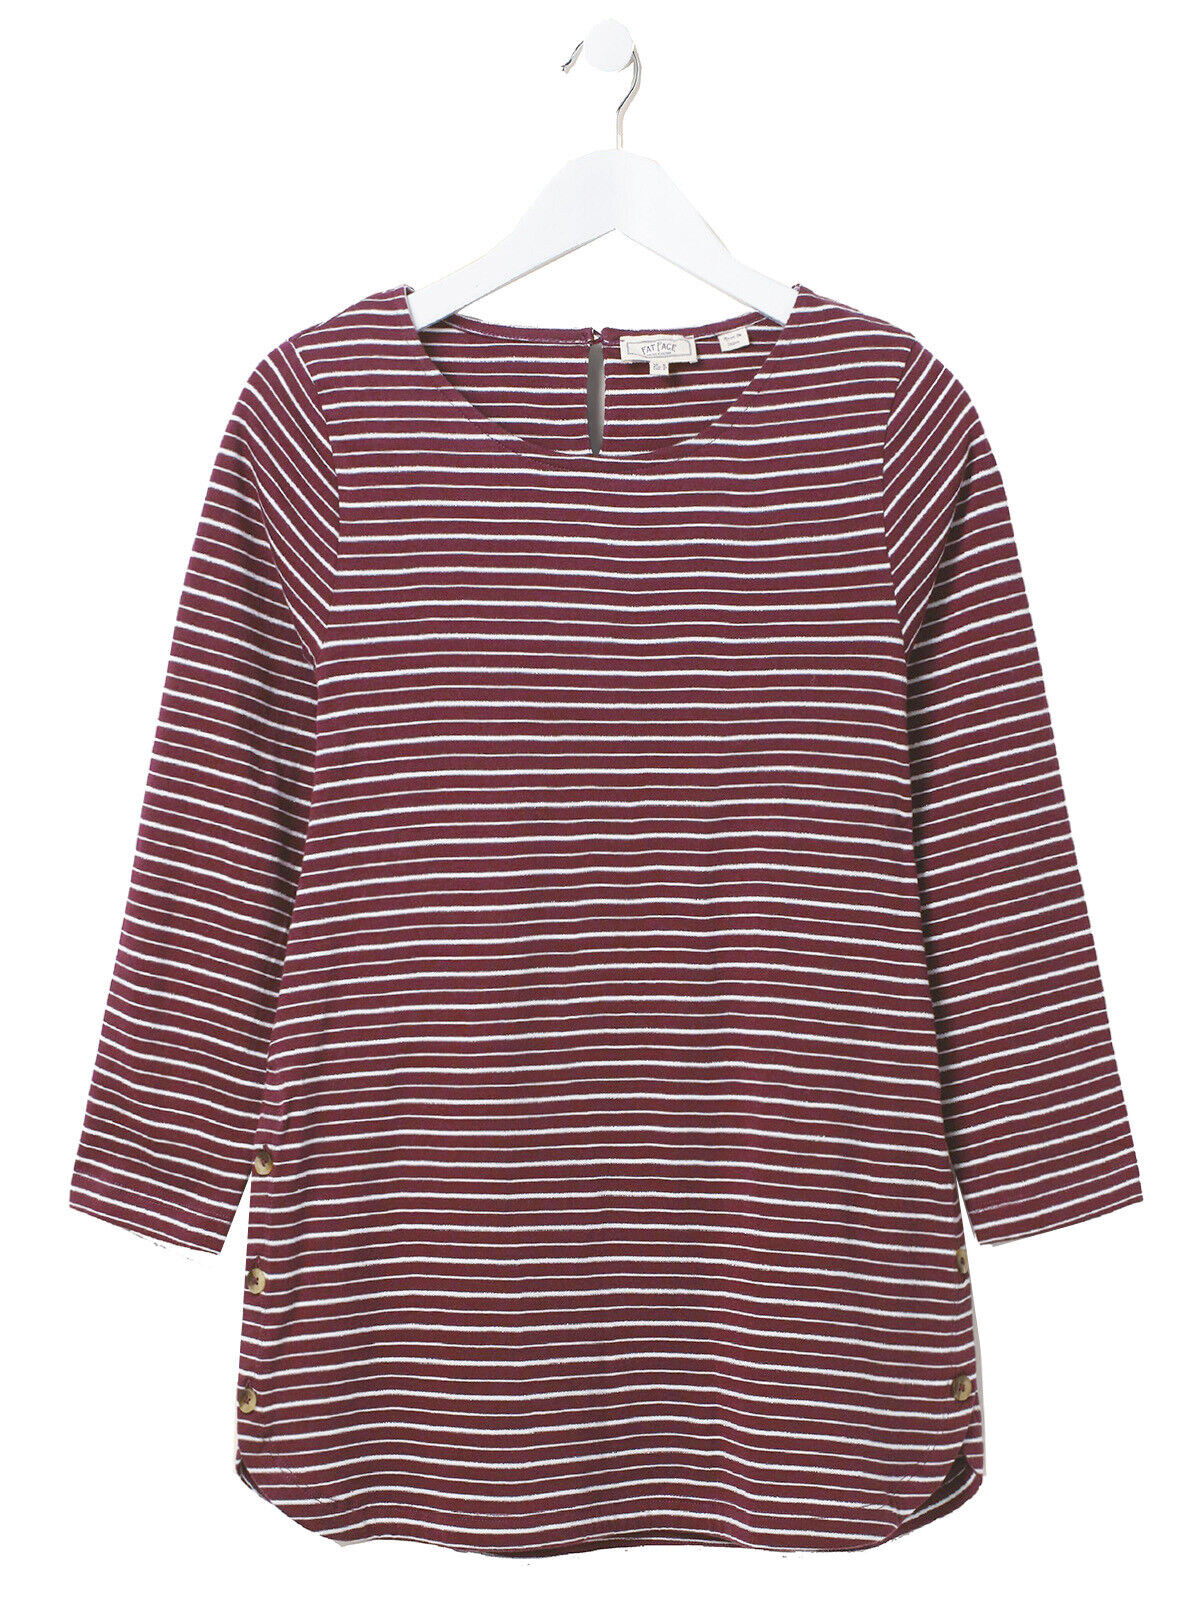 EX Fat Face Deep Berry Tulip Sparkle Stripe Top in Sizes 10 or 12 RRP £36